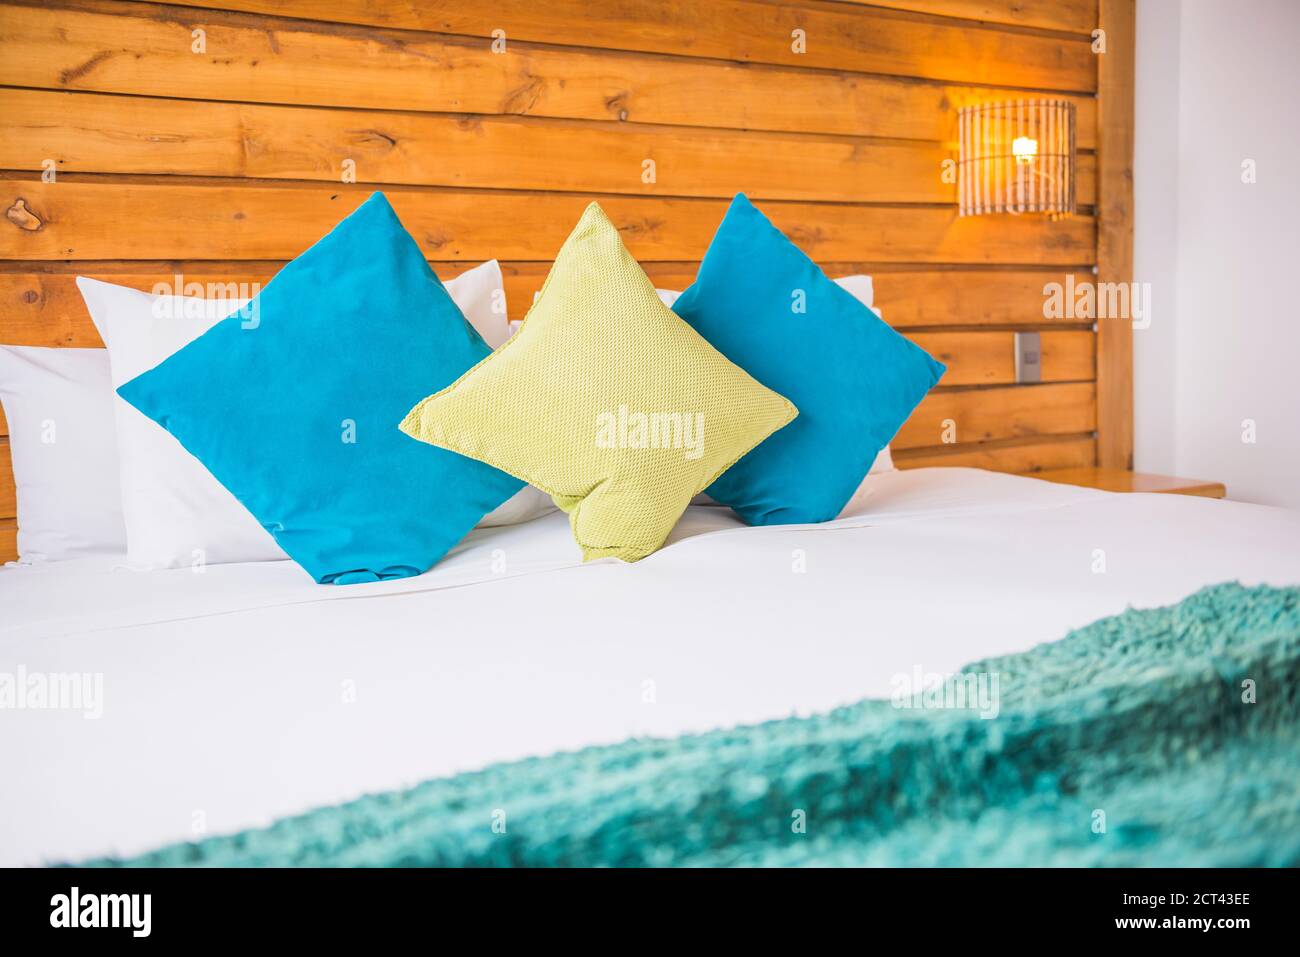 Decorative Pillows On Bed Arrangement With Bedroom Lamps And Bedside Tables  Stock Photo, Picture and Royalty Free Image. Image 103352867.